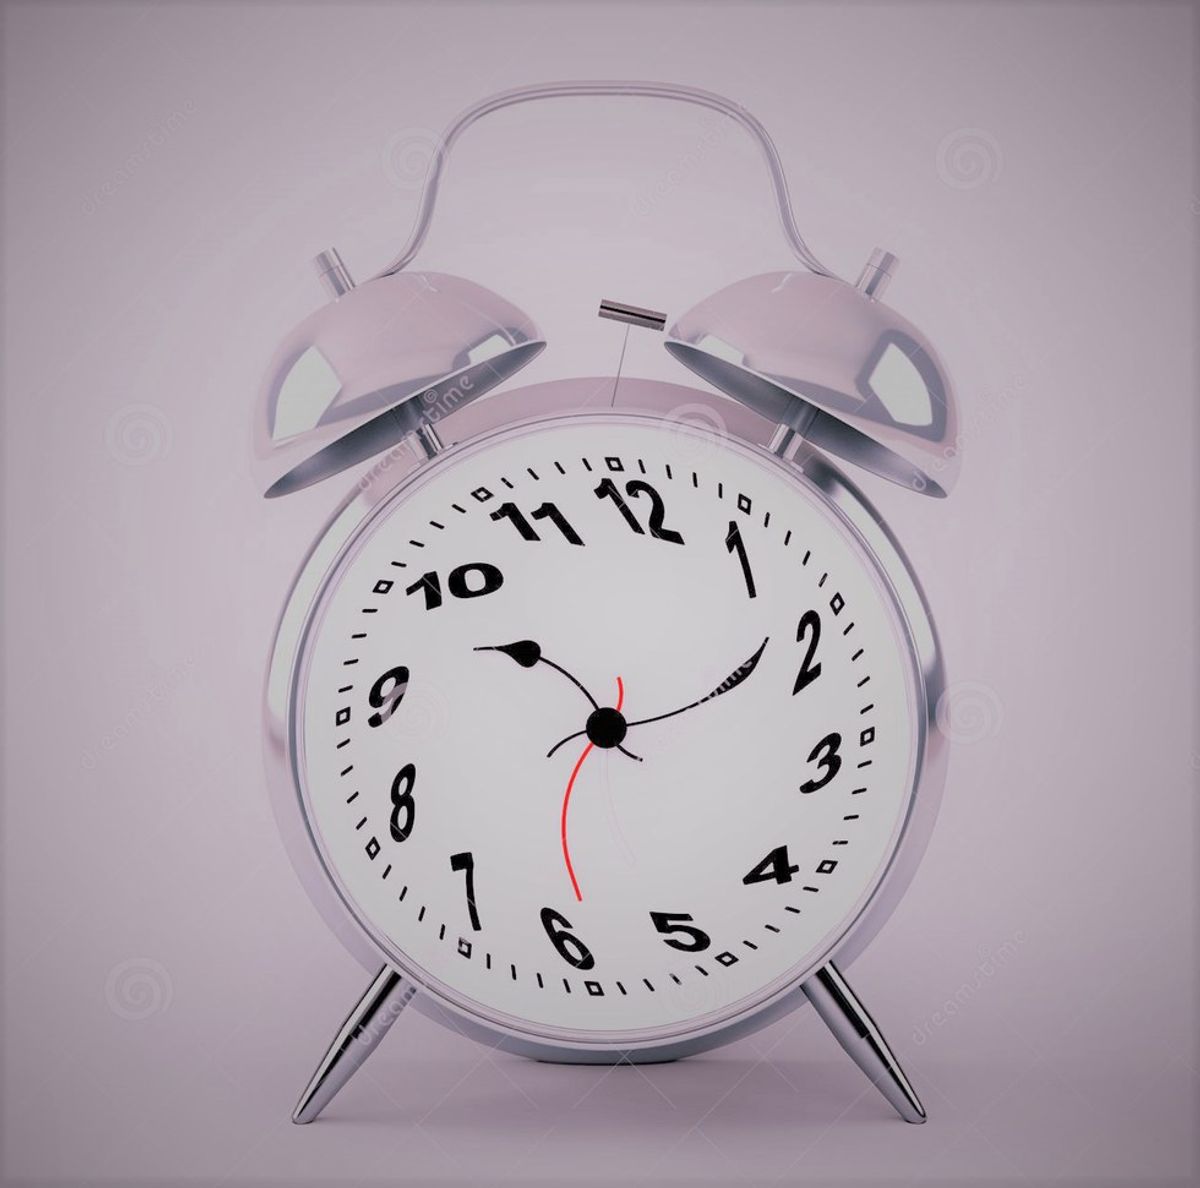 5 Tips For Mastering Time Management